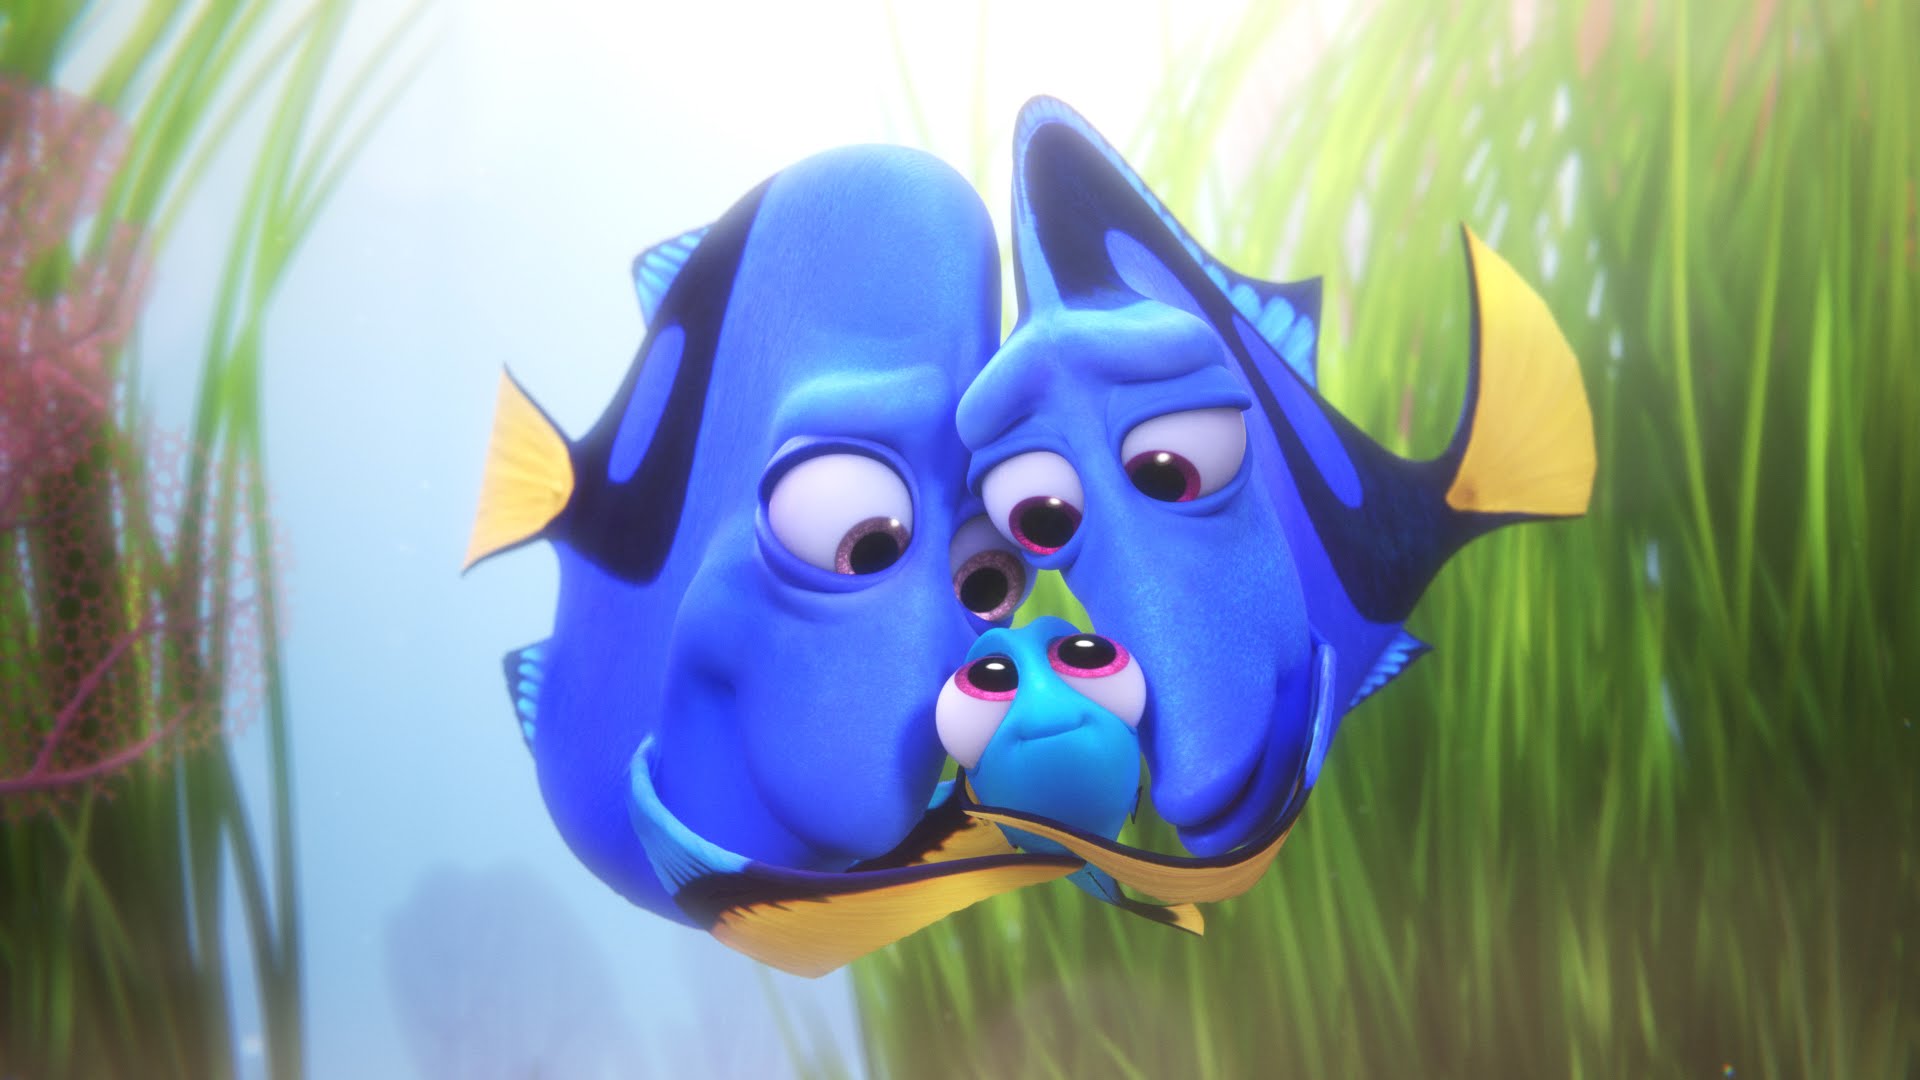 Finding Dory ALL MOVIE CLIPS - 2016 Pixar Animation - YouTube